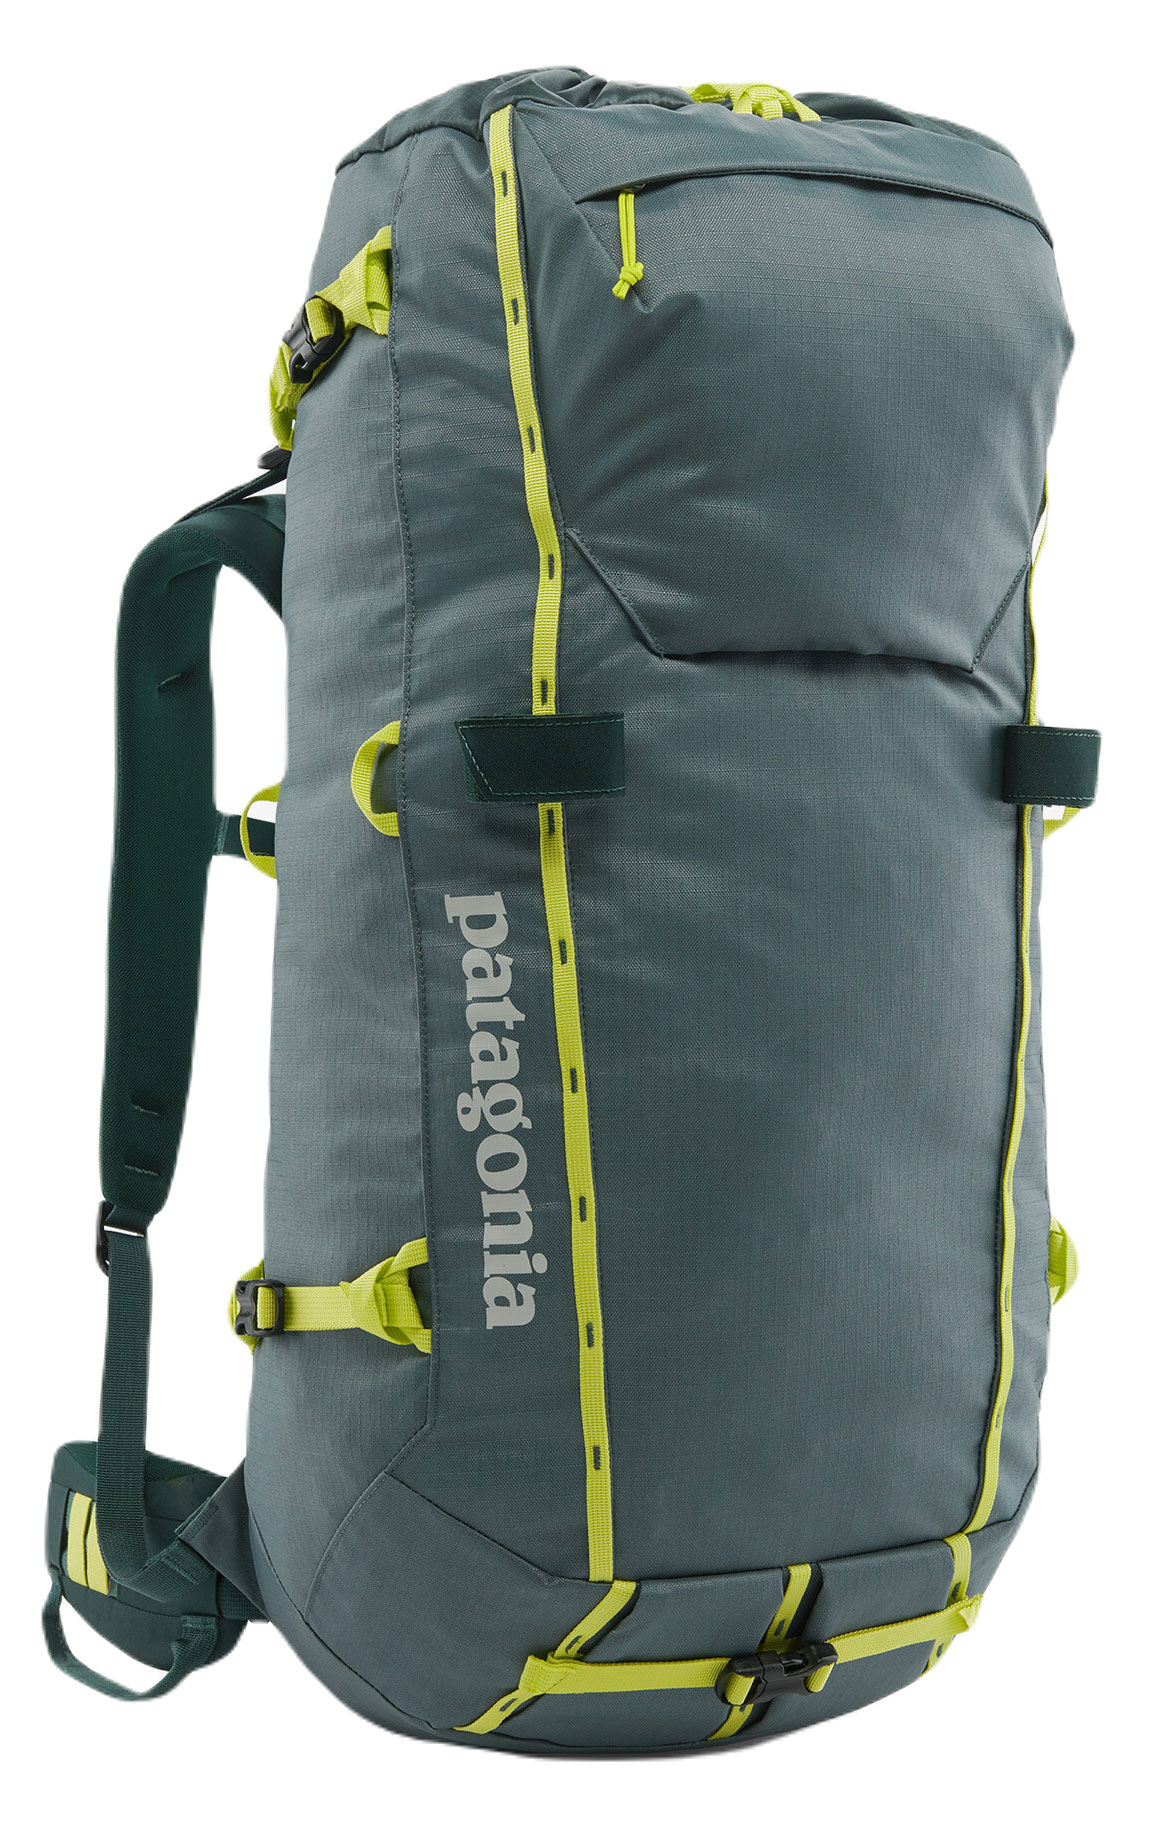 Patagonia-Ascensionist-35L-climbing-backpack